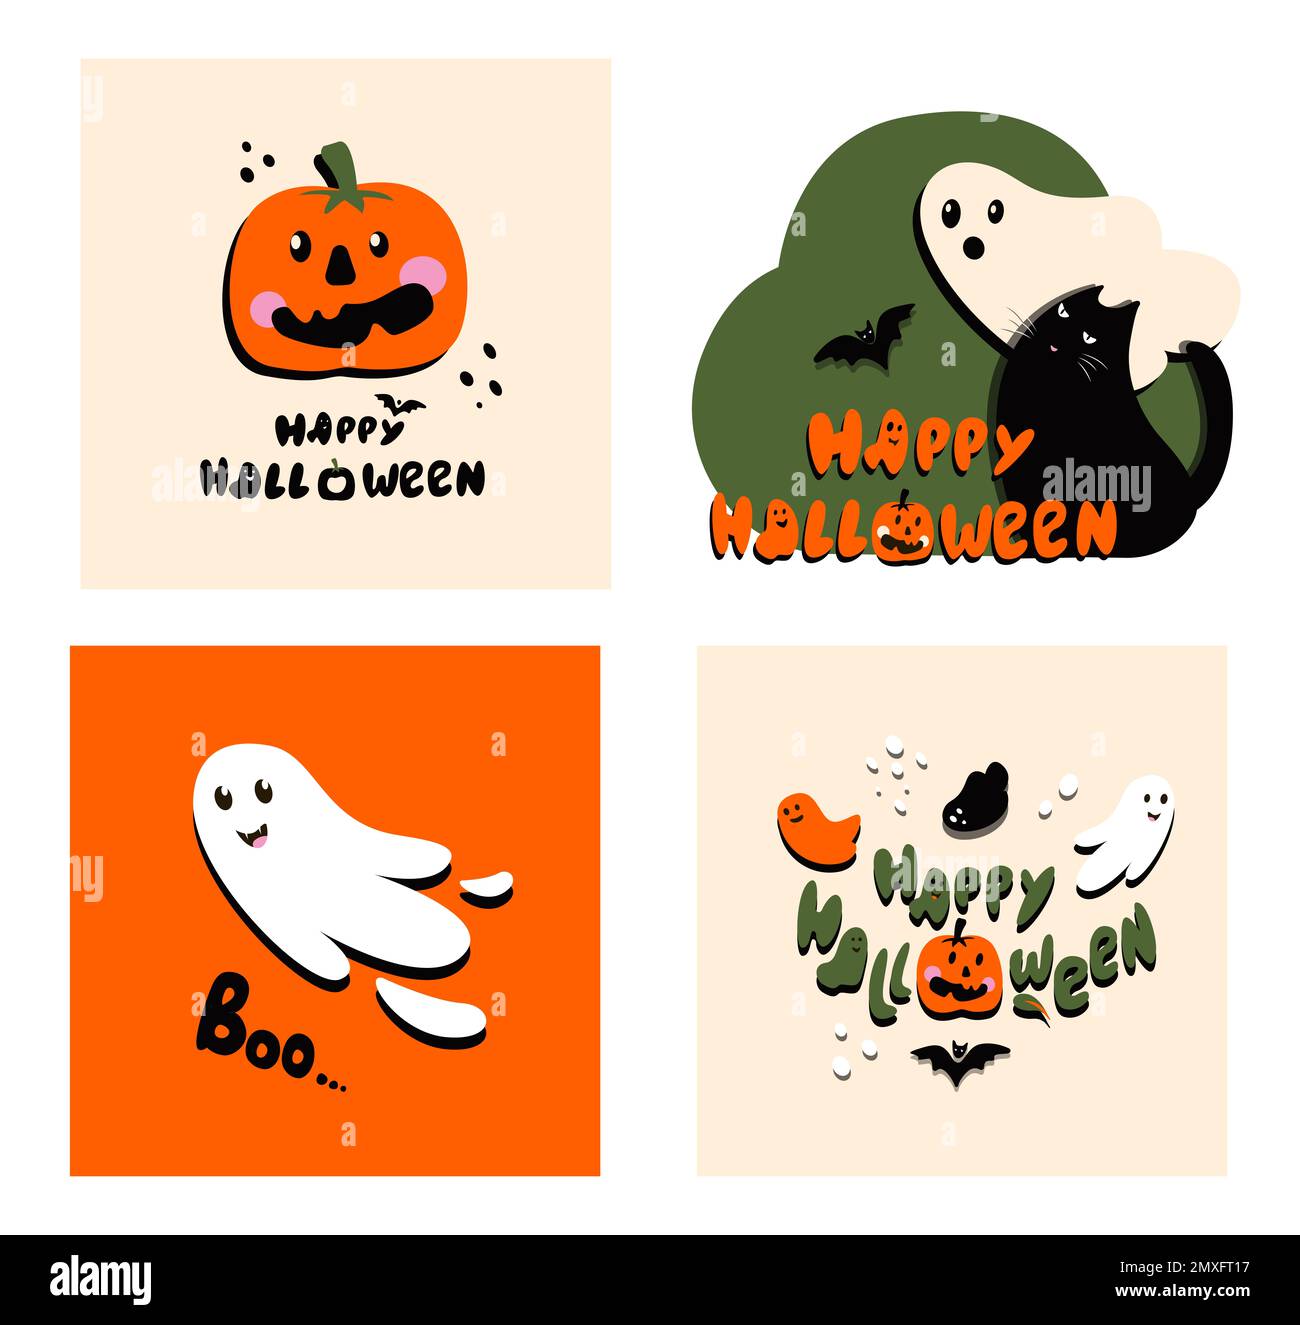 Halloween Bright Greeting Set Card.Creative Illustration with Funny Ghosts,Pumpkins,Bat,Cat Celebrating All Saints' Day.Allhallows Template for Hallow Stock Photo